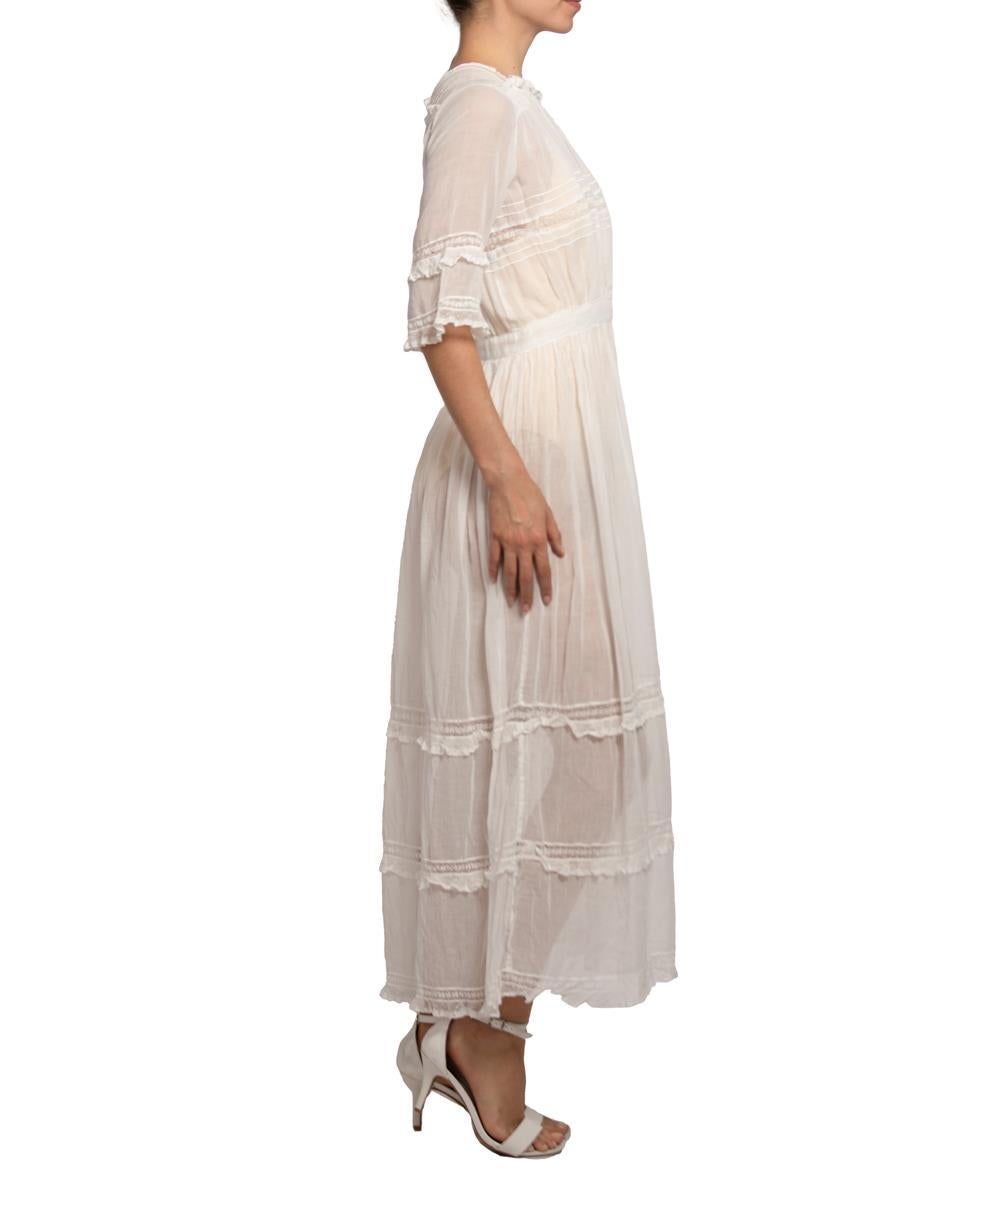 Edwardian White Organic Cotton Dress With Beautiful Lave Trim Detail In Excellent Condition For Sale In New York, NY